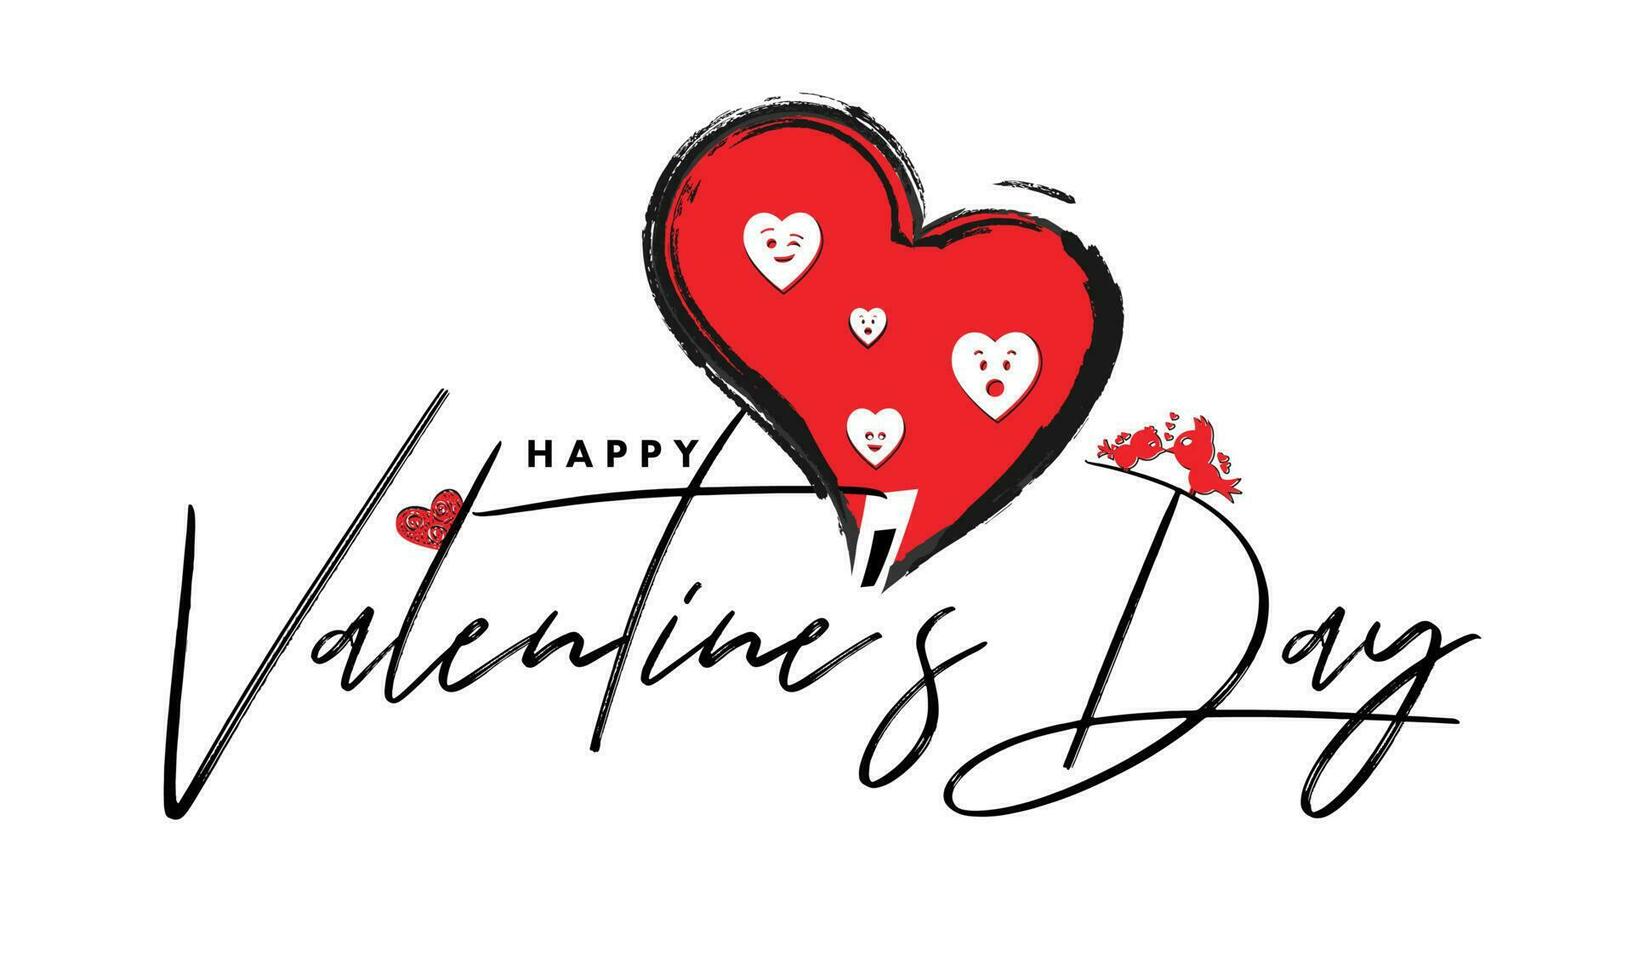 Happy Valentine's Day Text with Loving Birds Couple and Creative Hearts Expression on White Background. vector